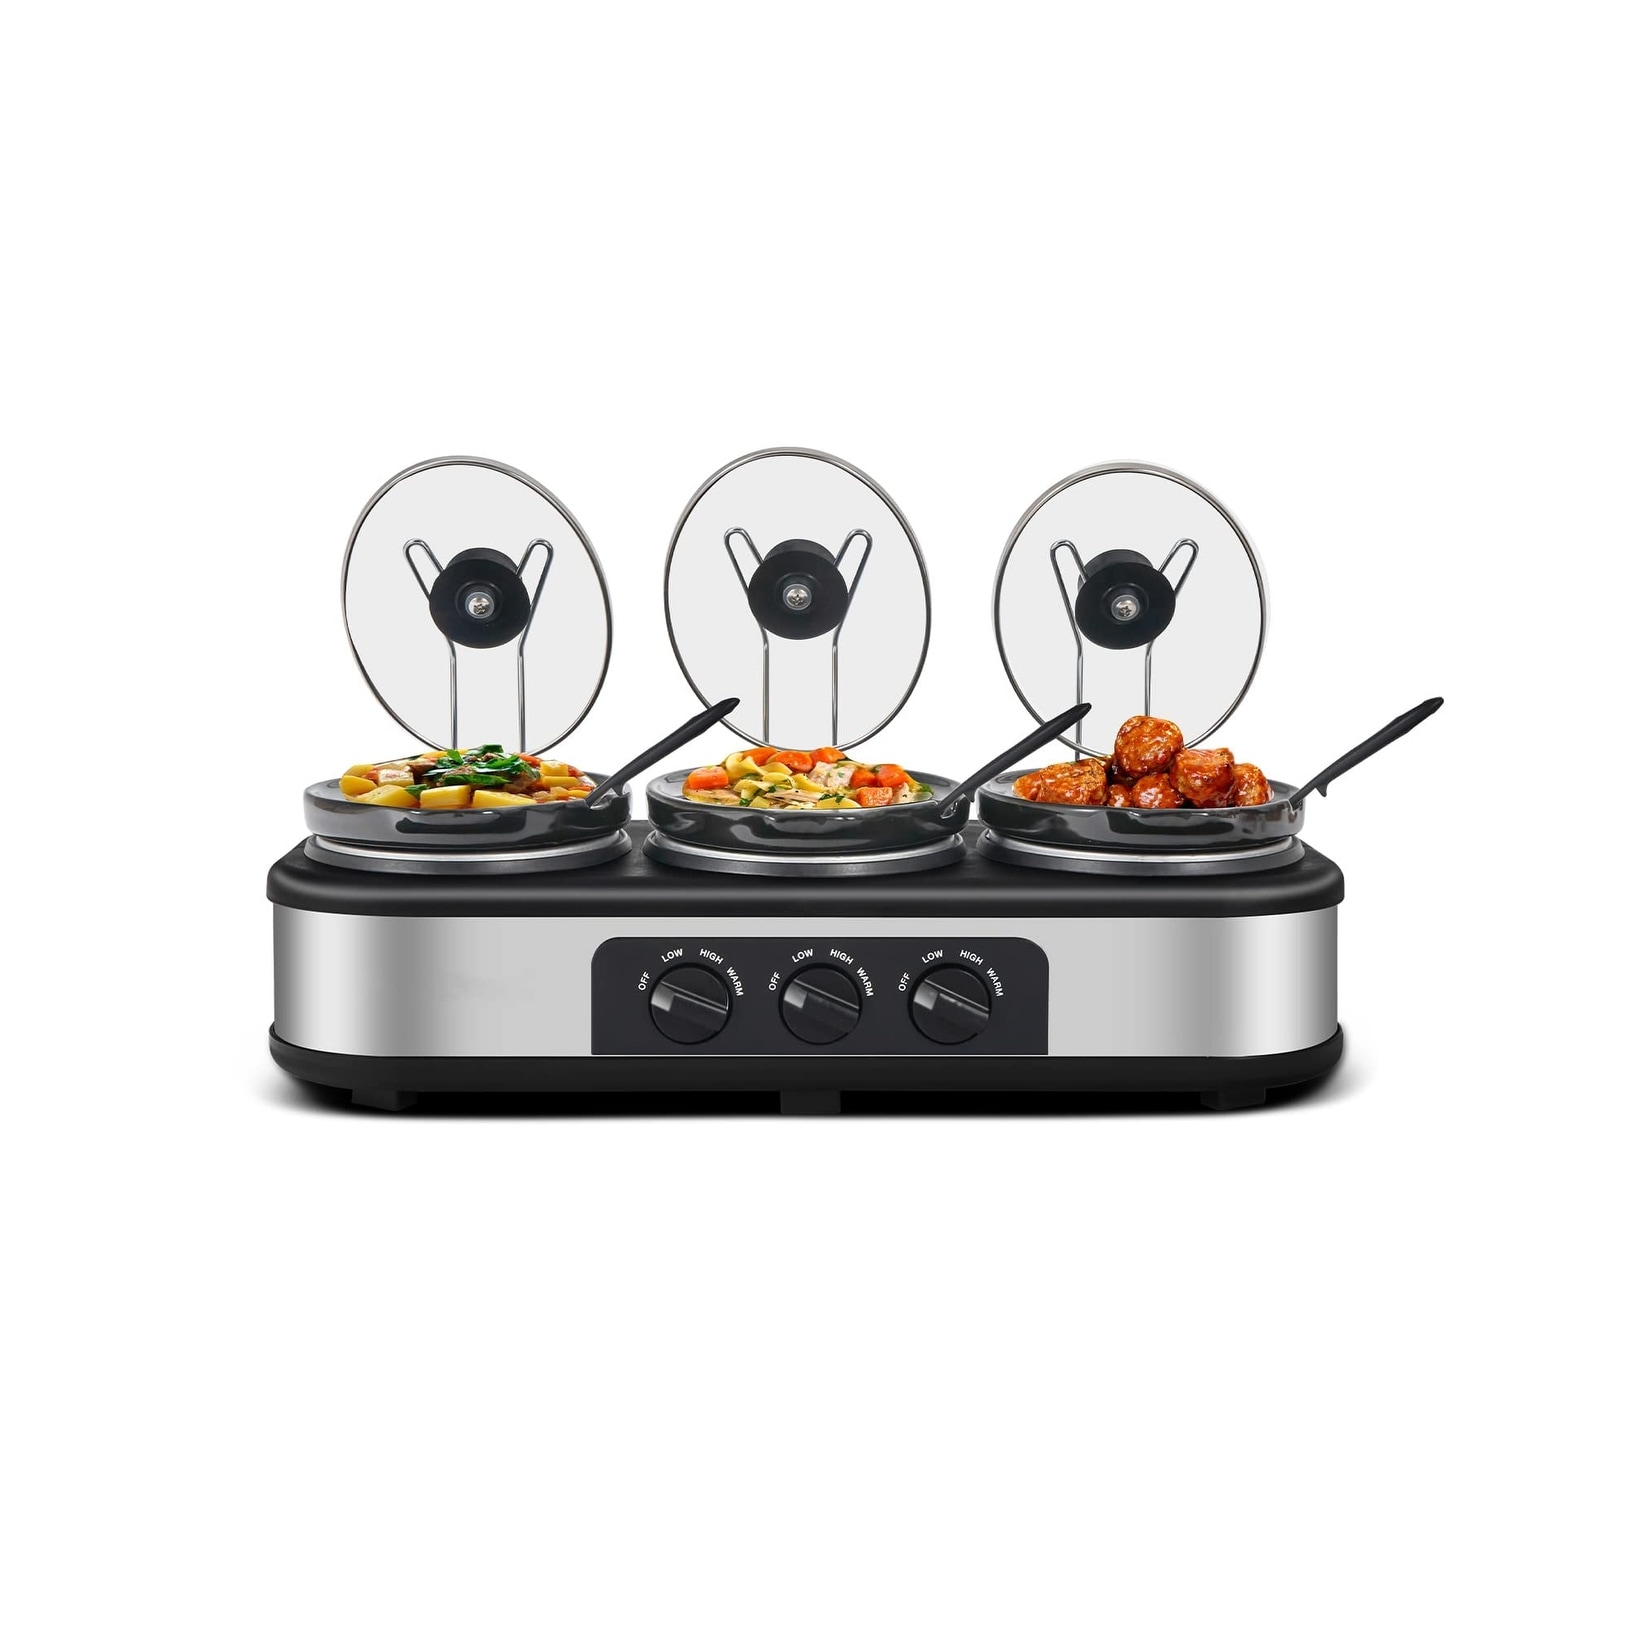 Triple Slow Cooker with Lid Rests, Breakfast Buffet Servers and Warmers  with 3 X 1.5Qt, Lids & Adjustable Temp, Dishwasher Safe - Bed Bath & Beyond  - 39589152